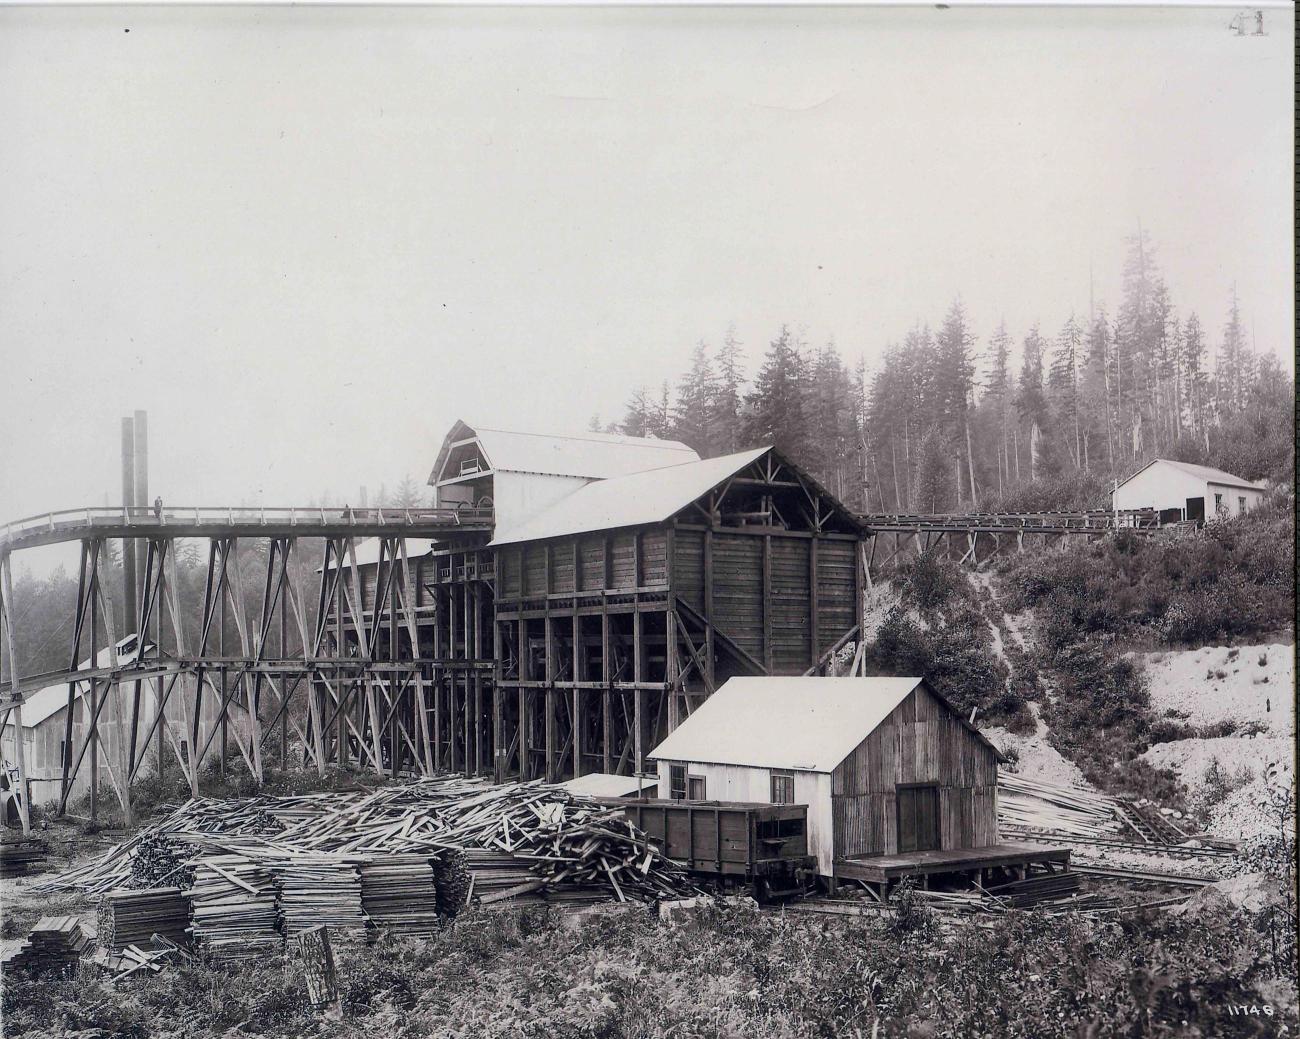 Historic black and white image of the Franklin Townsite shwoing an old logging mill and lumber piles